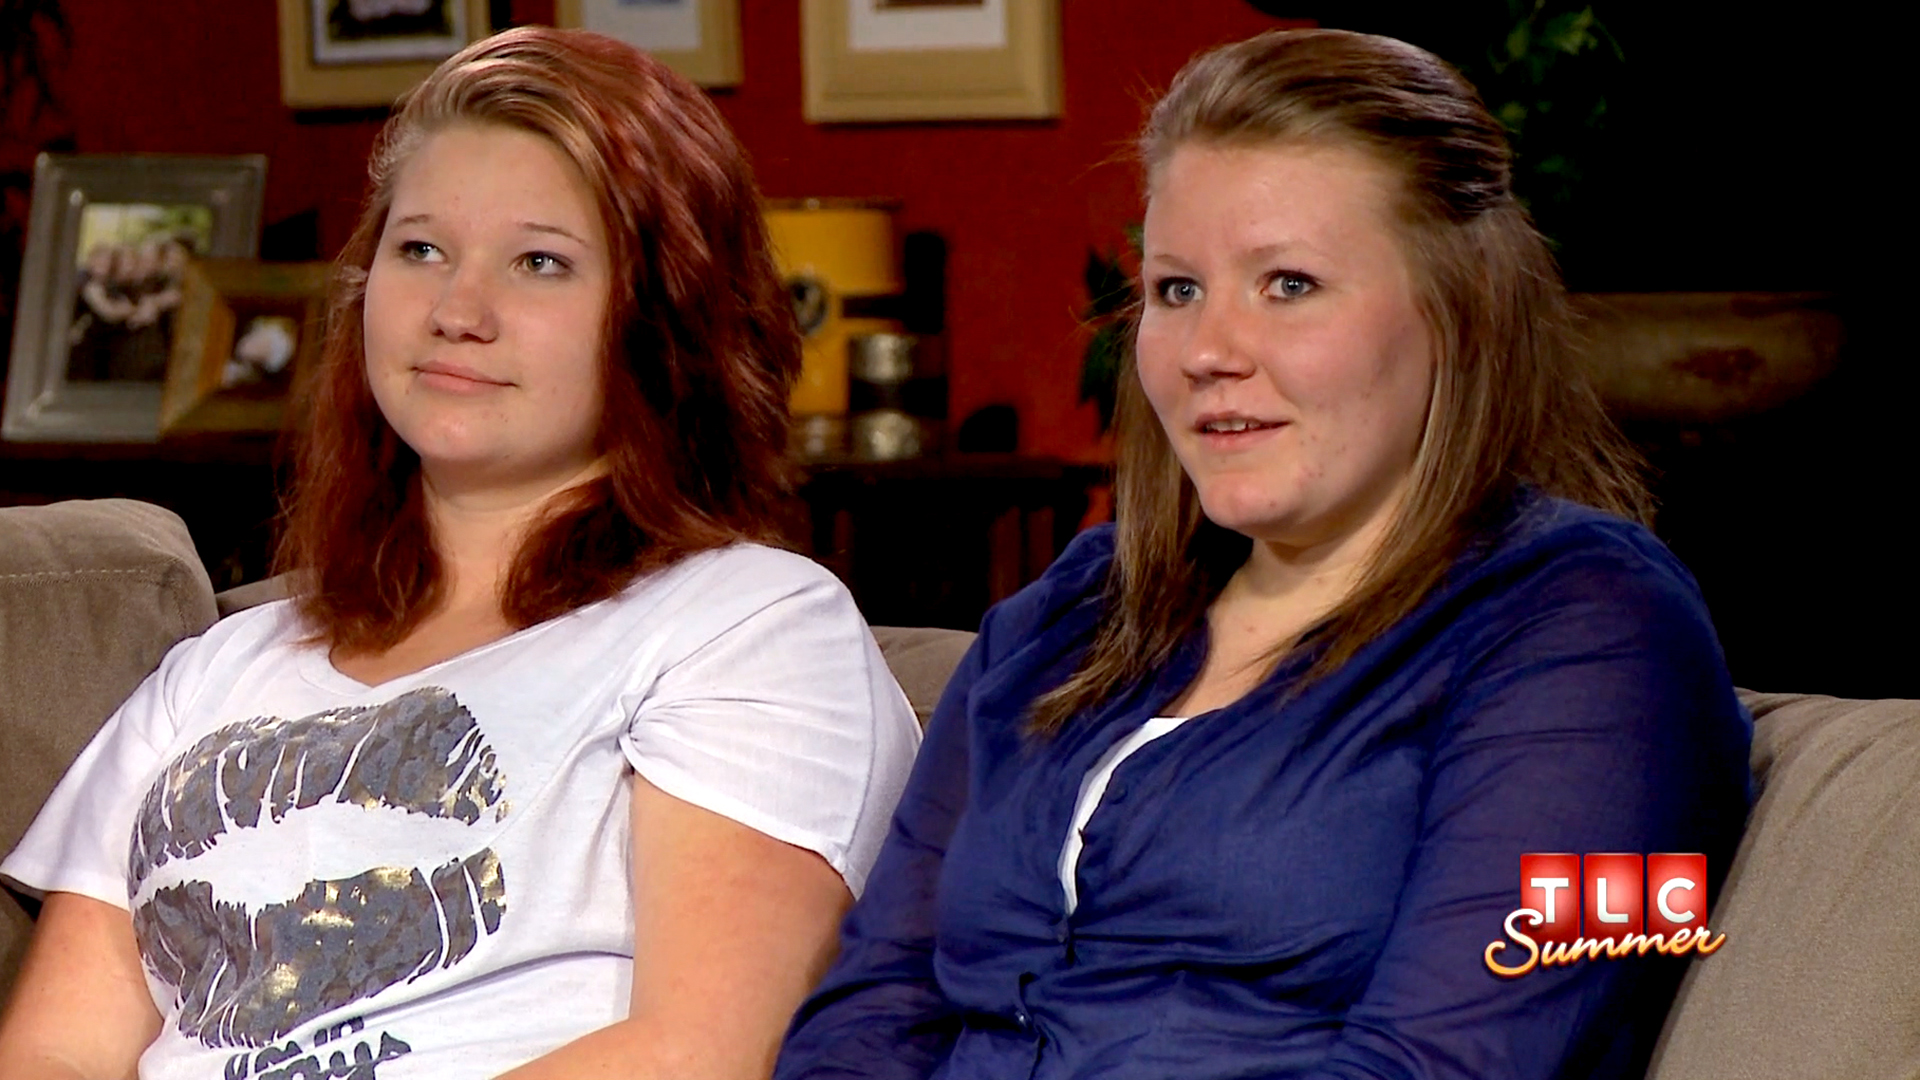 Sister Wives' daughter wants a plural marriage.